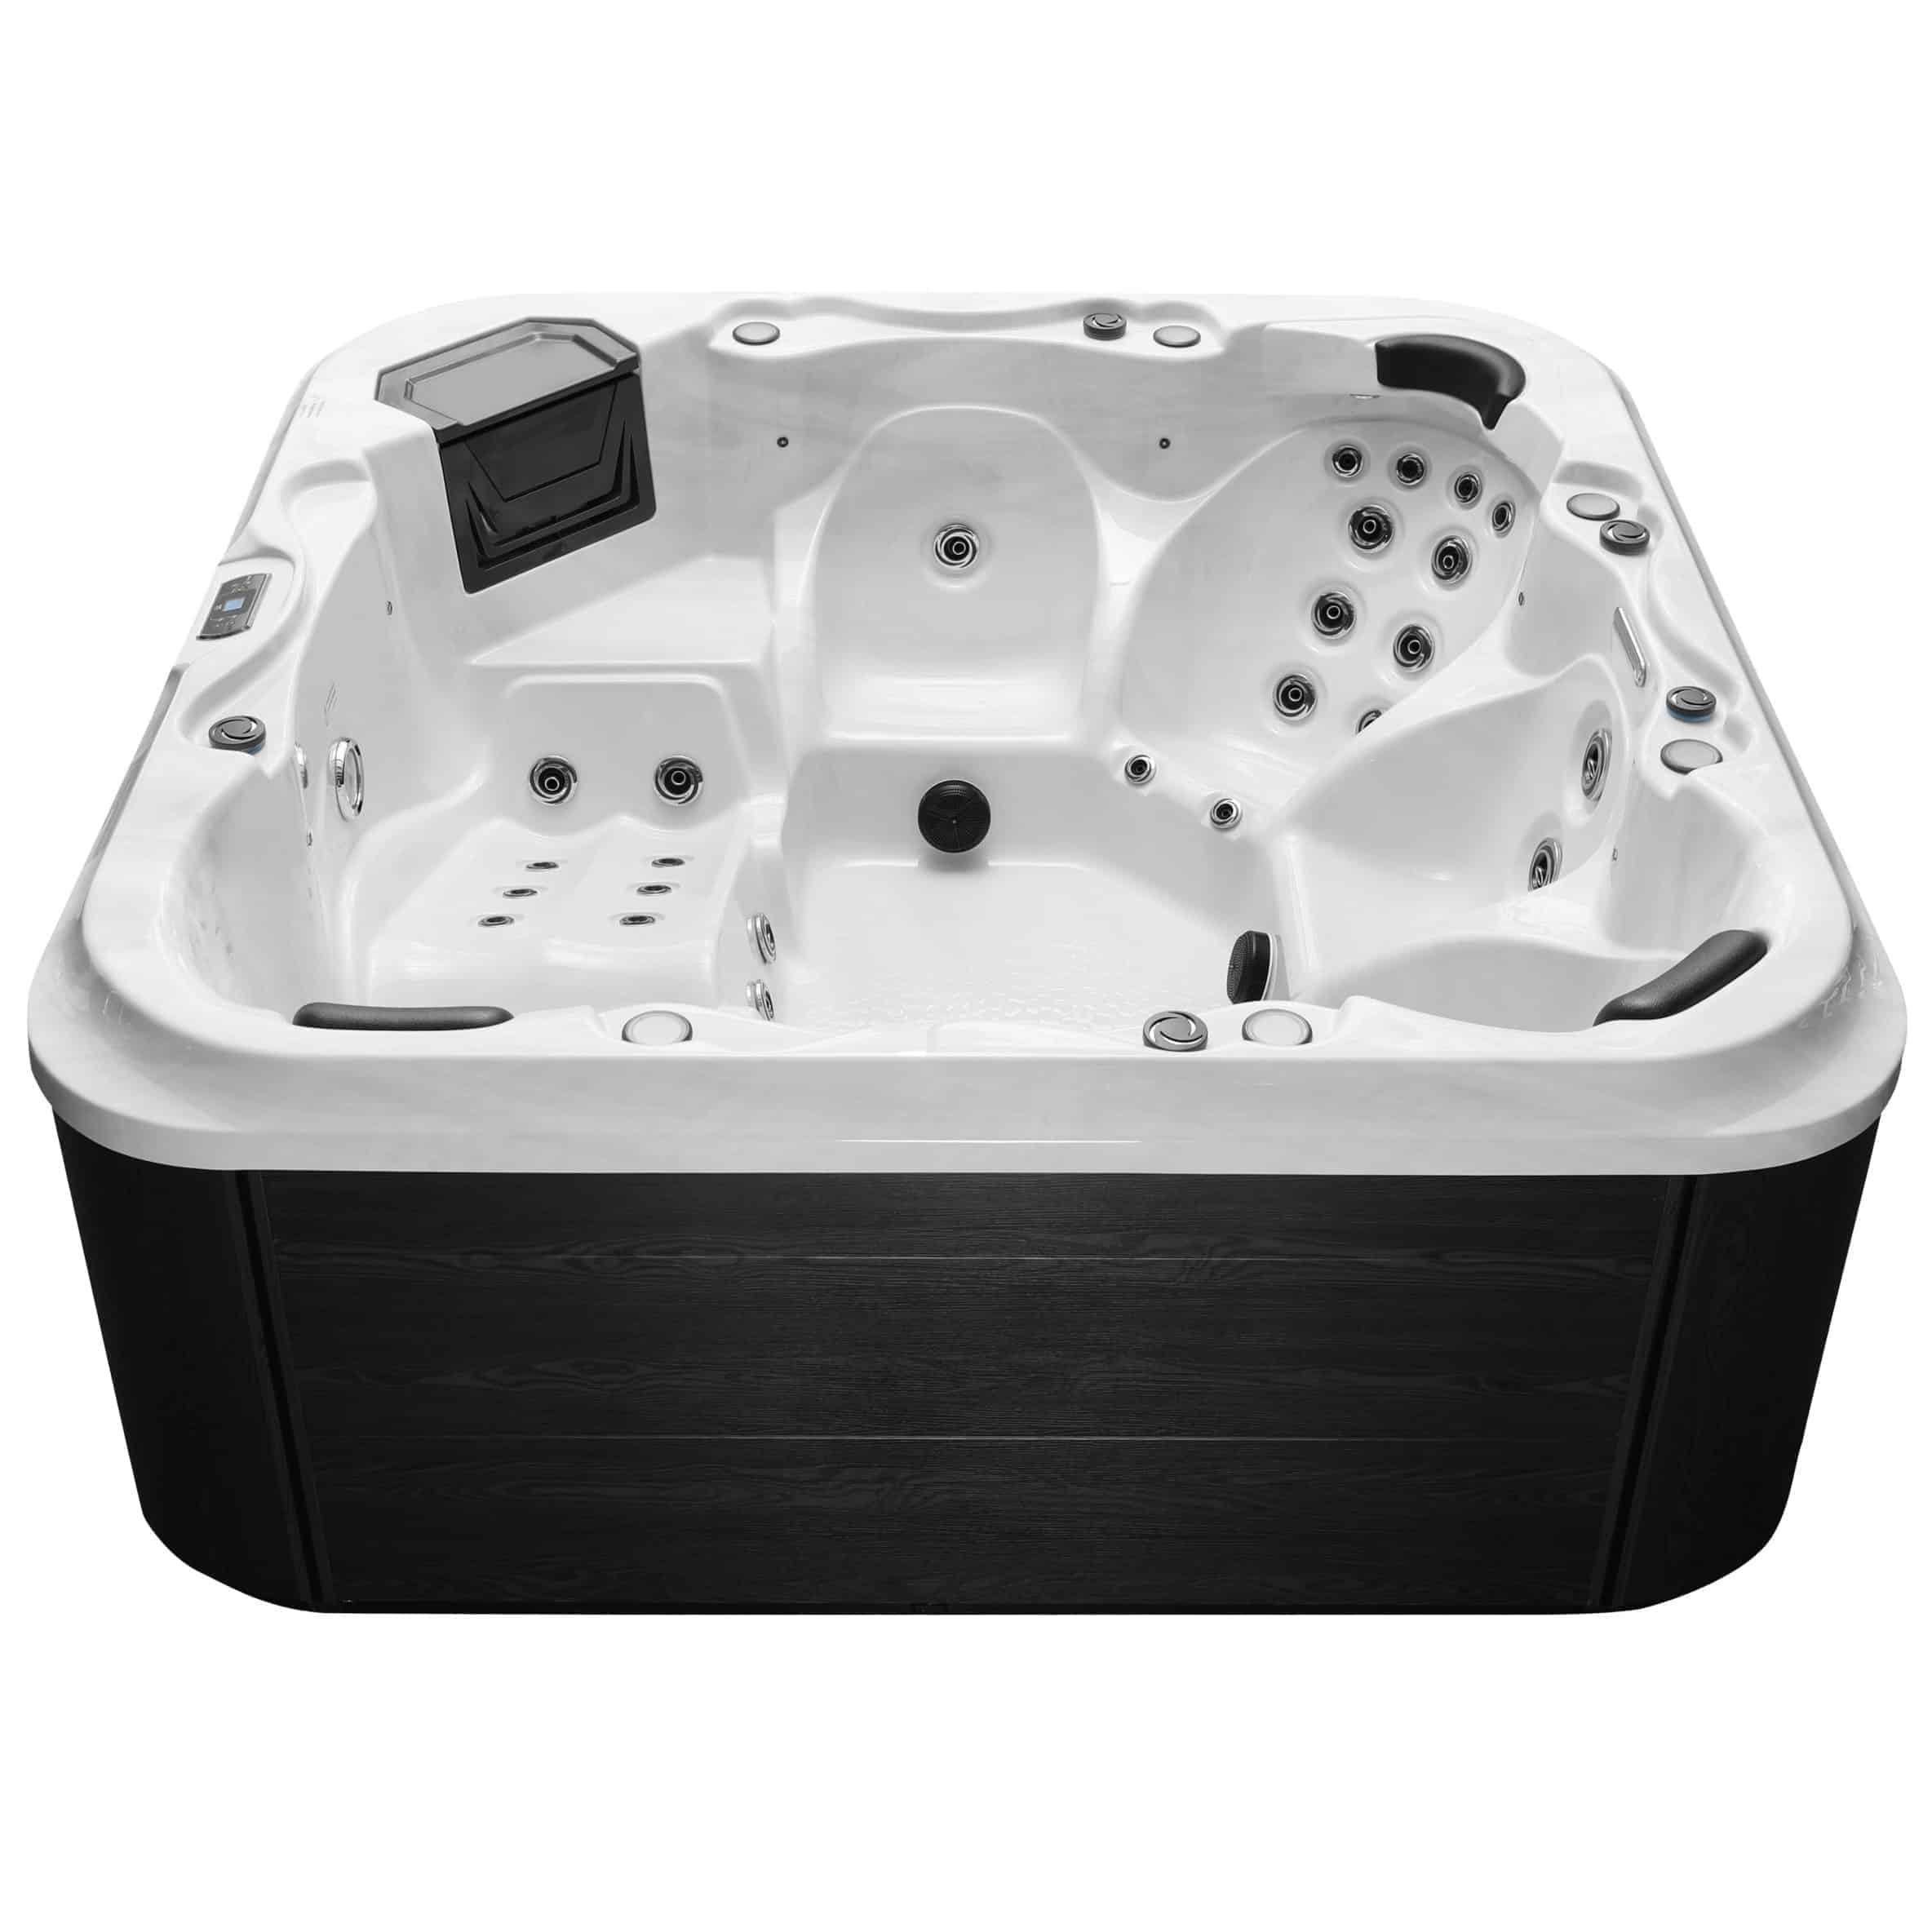 The Best Hot Tub for Sale